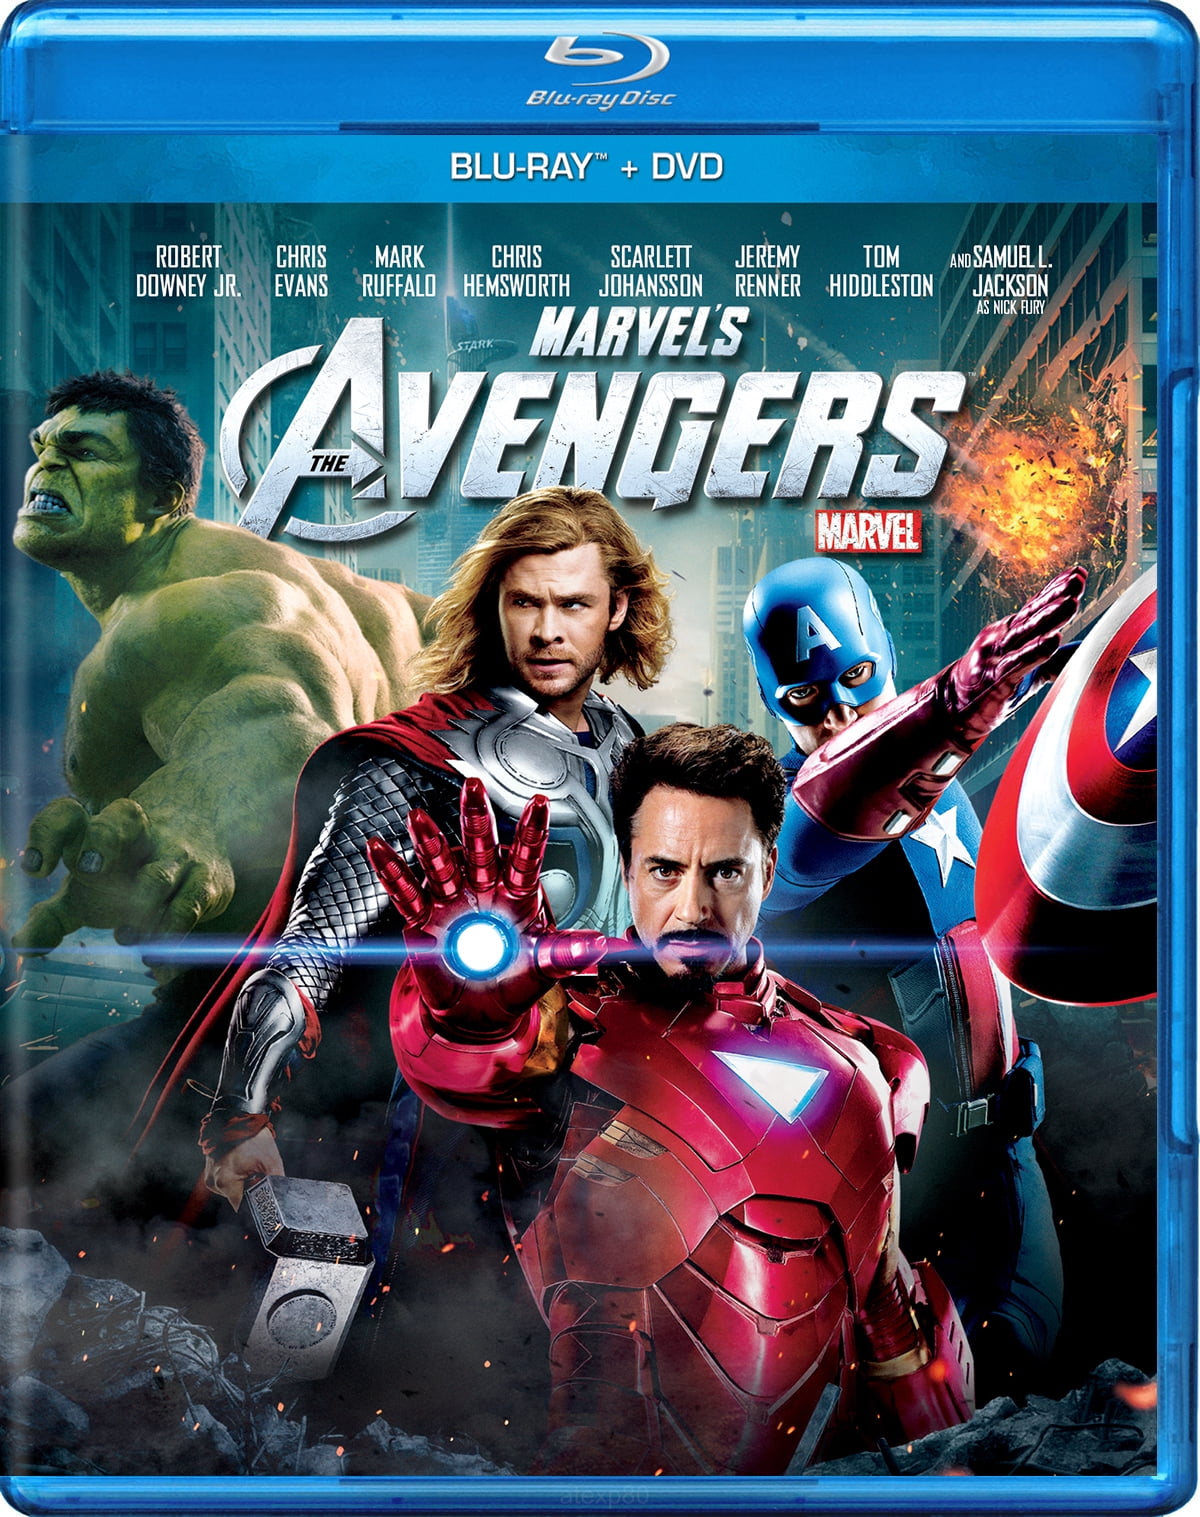 Marvel's The Avengers (Two-Disc Blu-ray/DVD Combo in Blu-ray Packaging) (Blu-ray) - Walmart.com